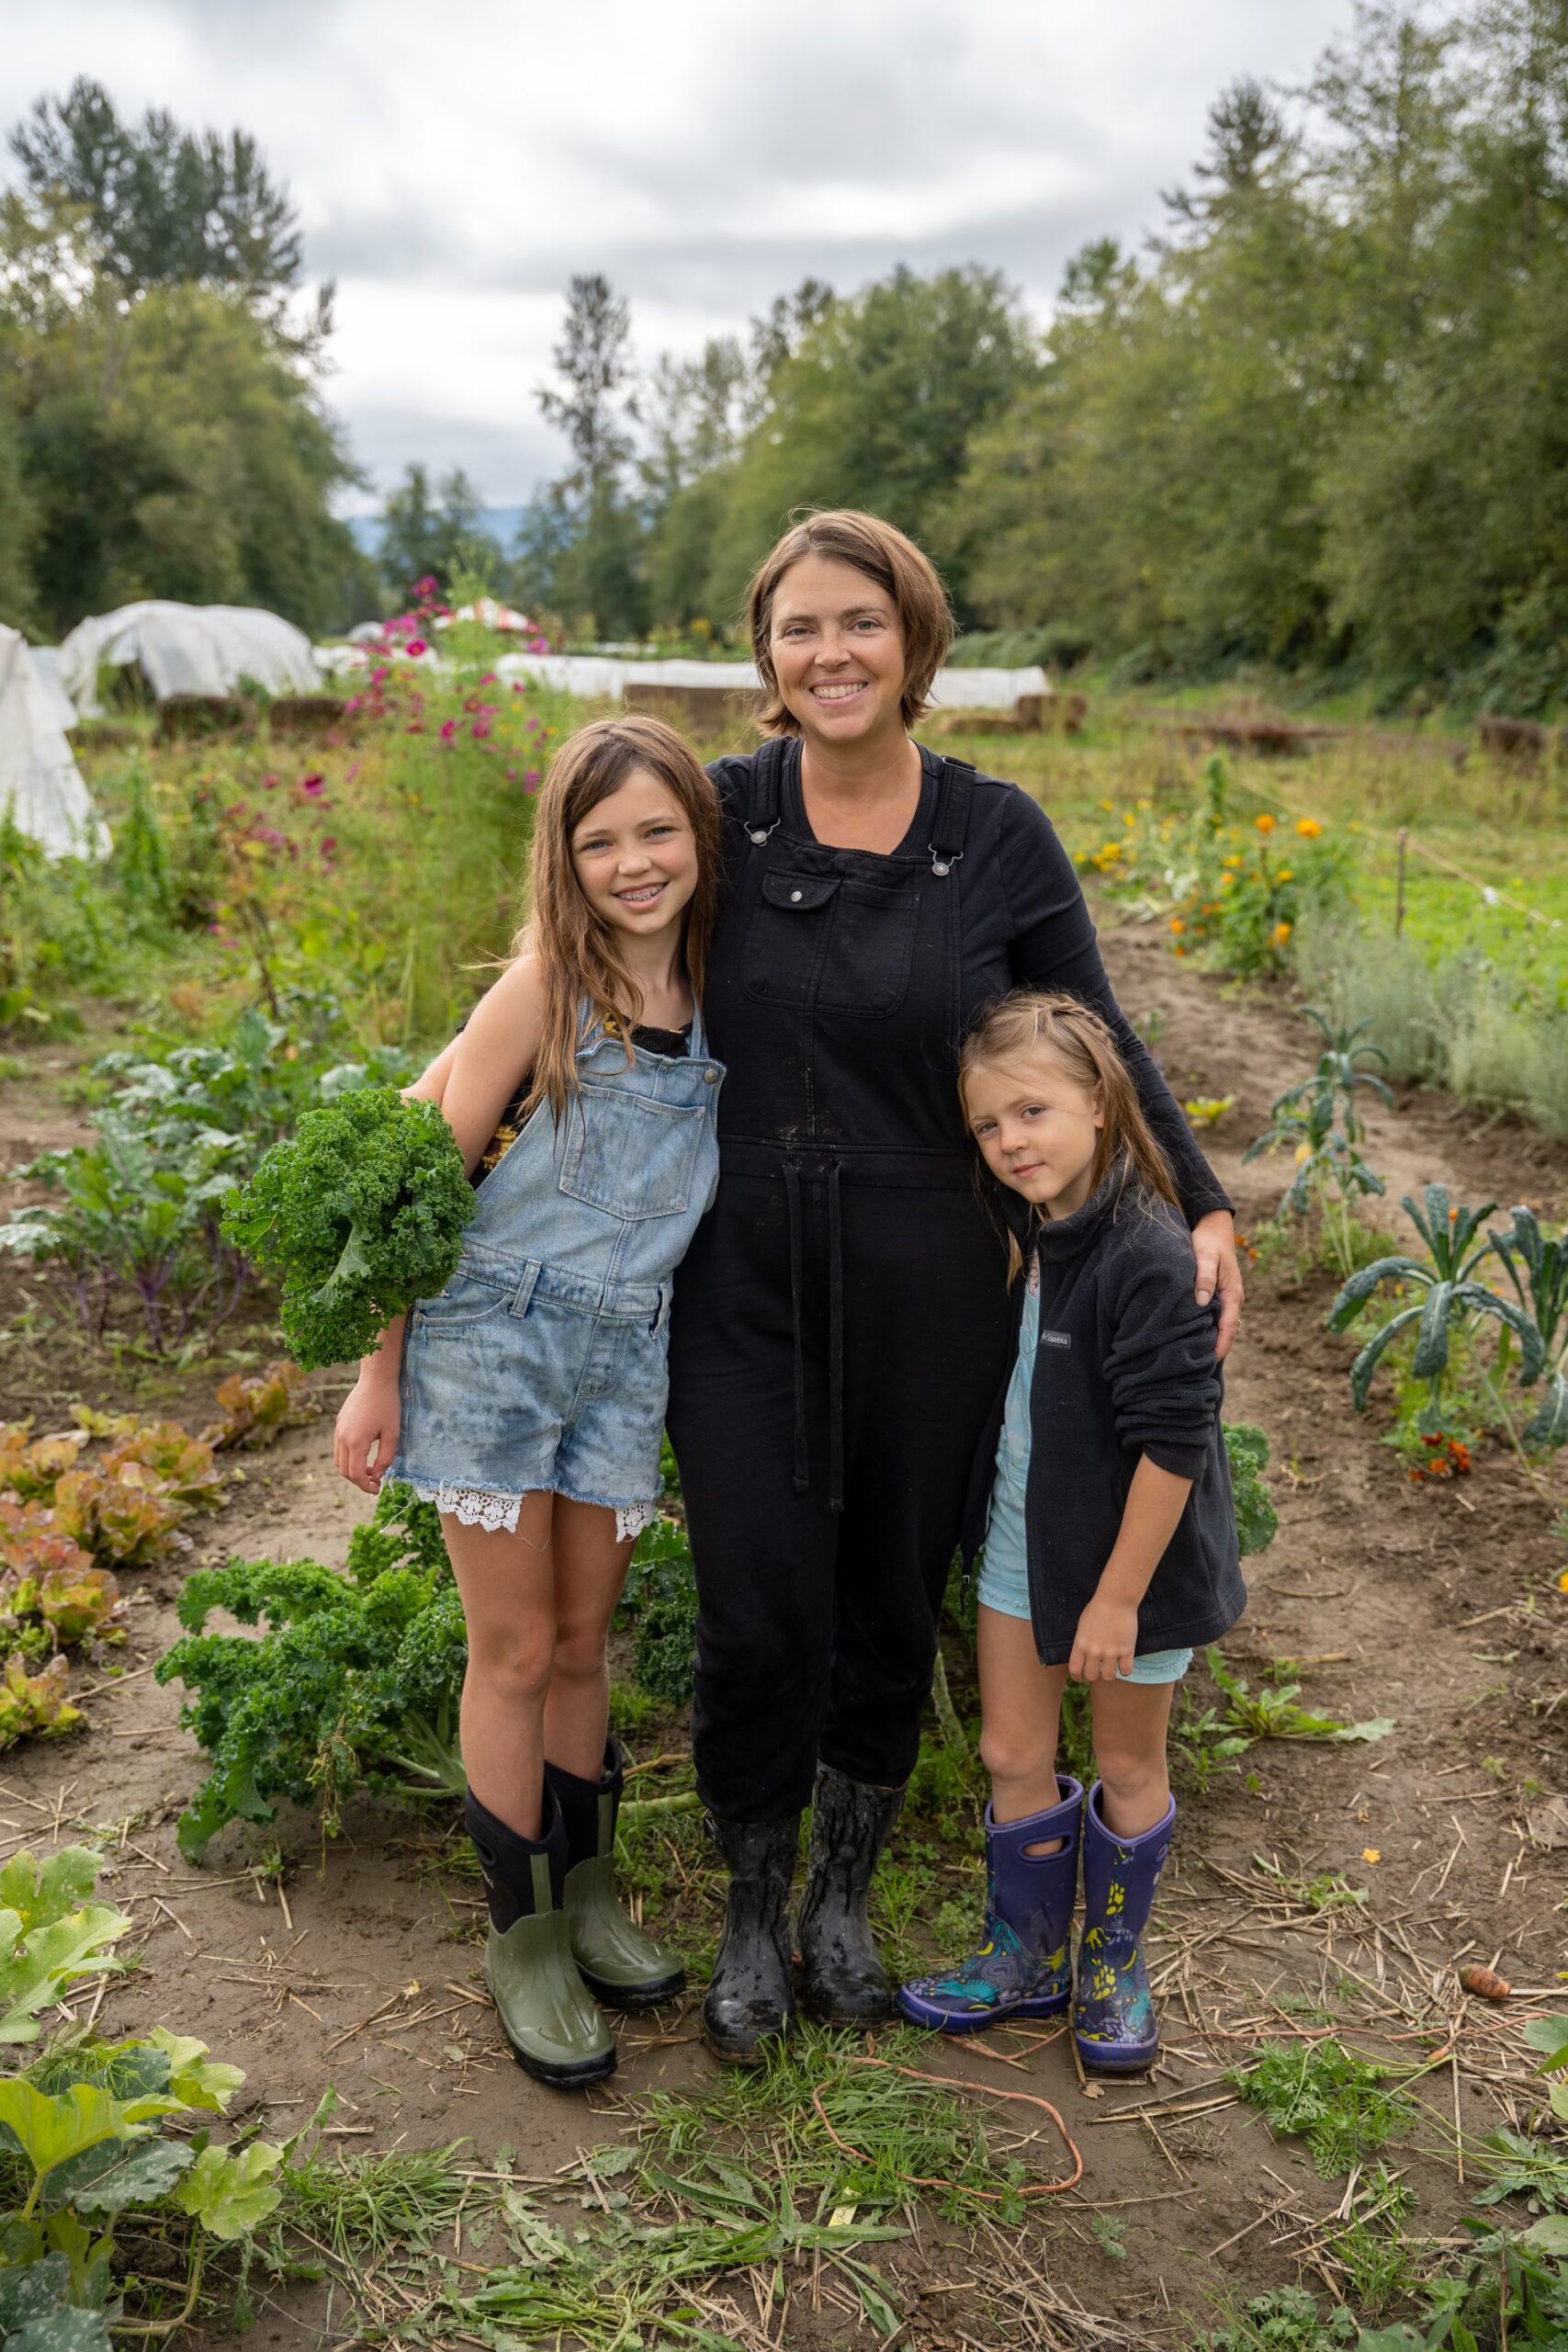 Photo of Dana, the farm owner, and her two daughters in their home garden